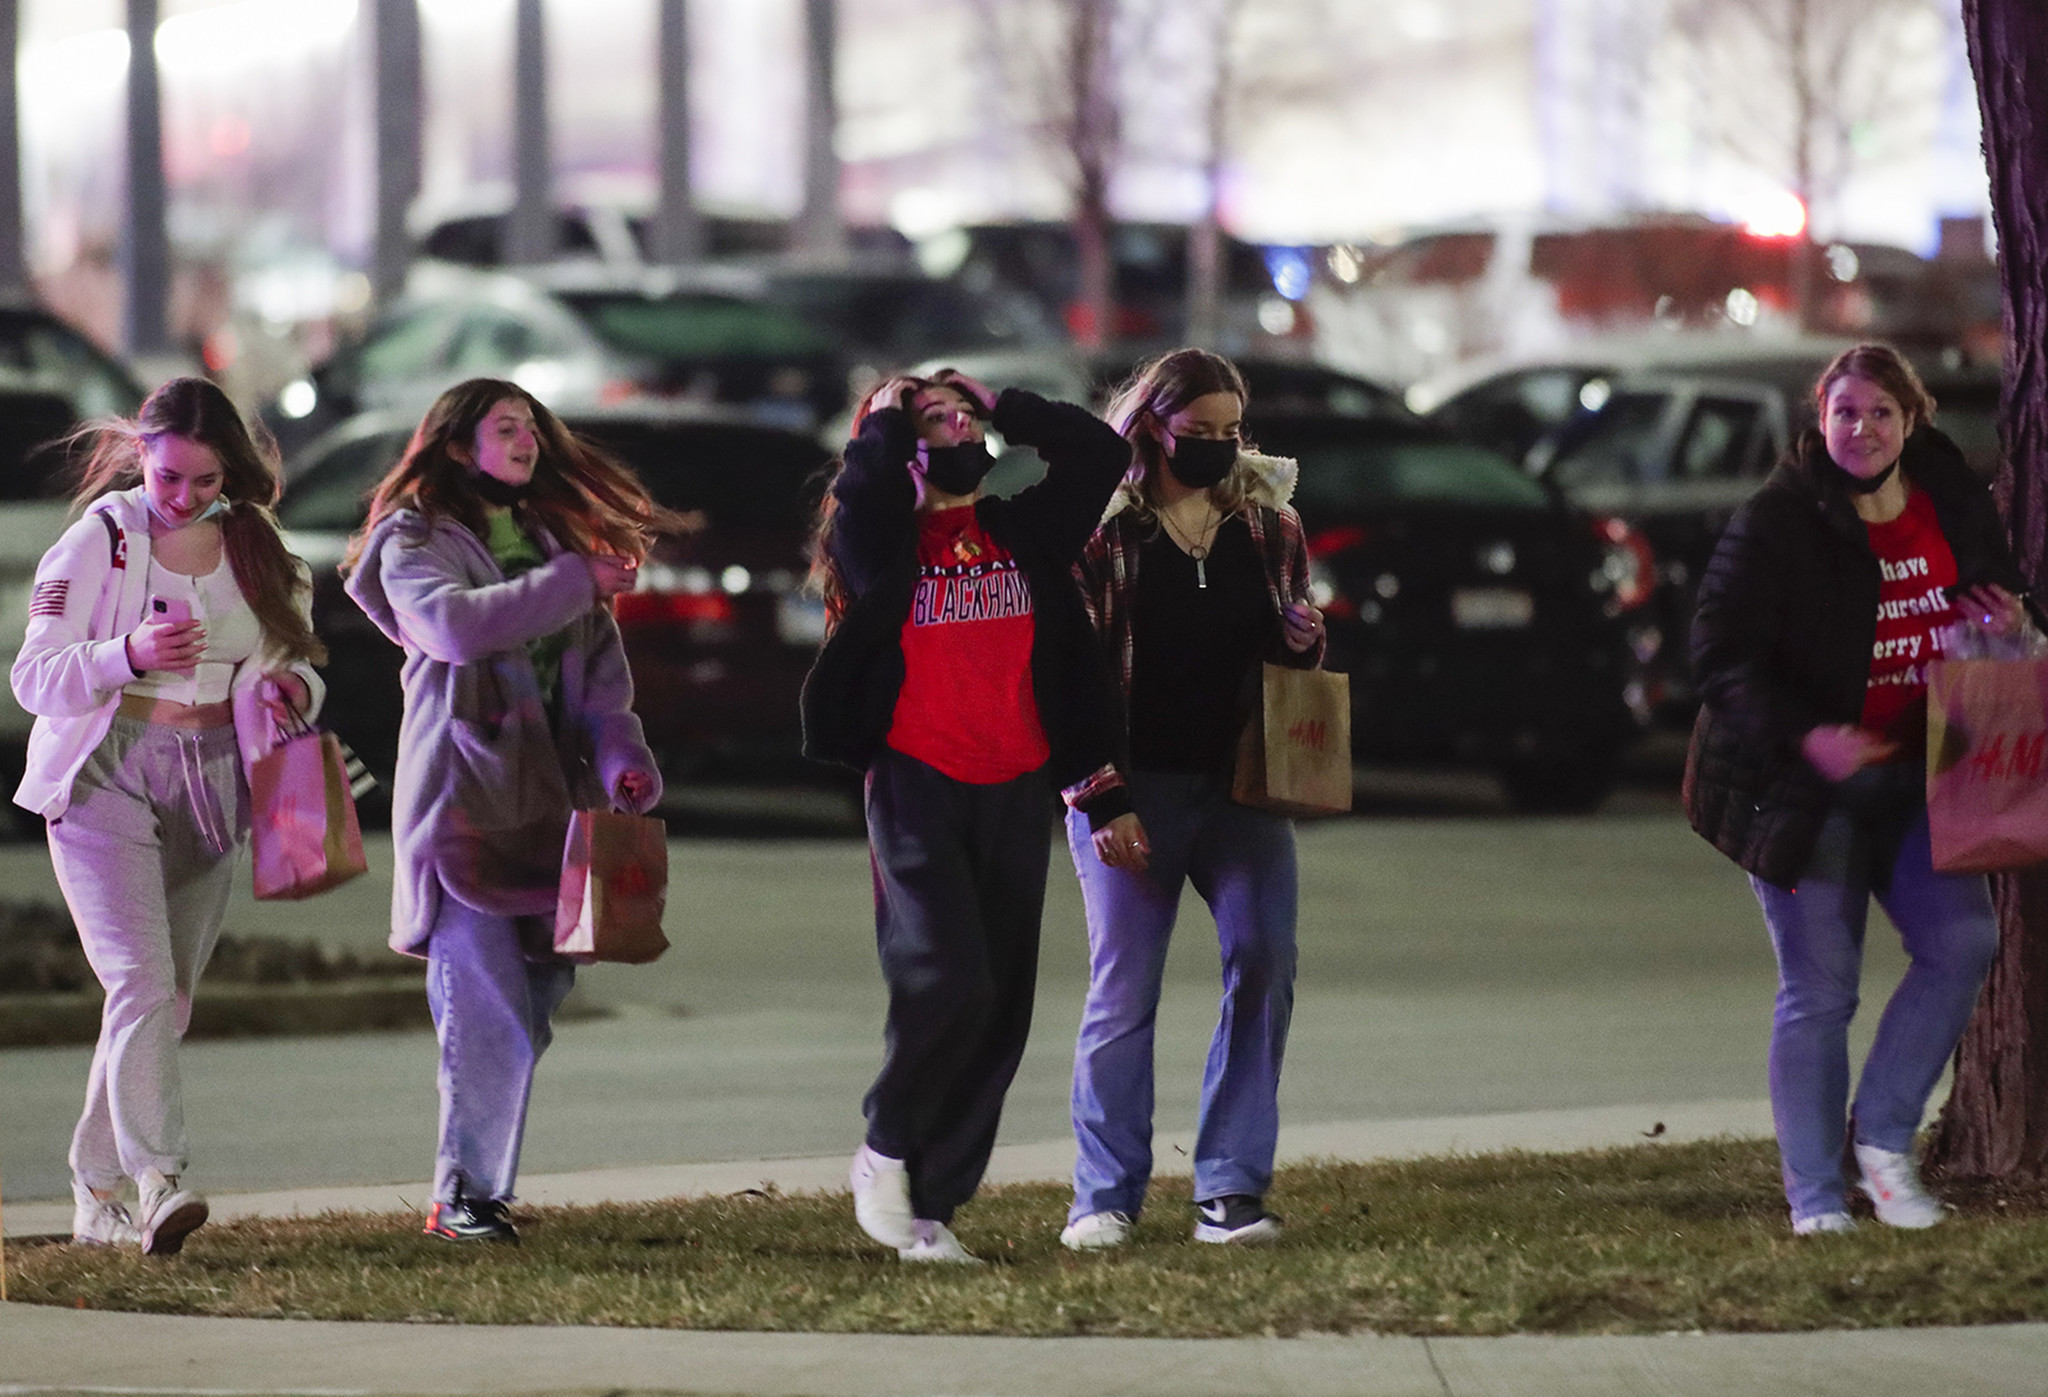 It doesn't scare me away': Oakbrook Center's Christmas Eve shoppers unfazed  after Thursday shooting that left 4 people injured – Chicago Tribune